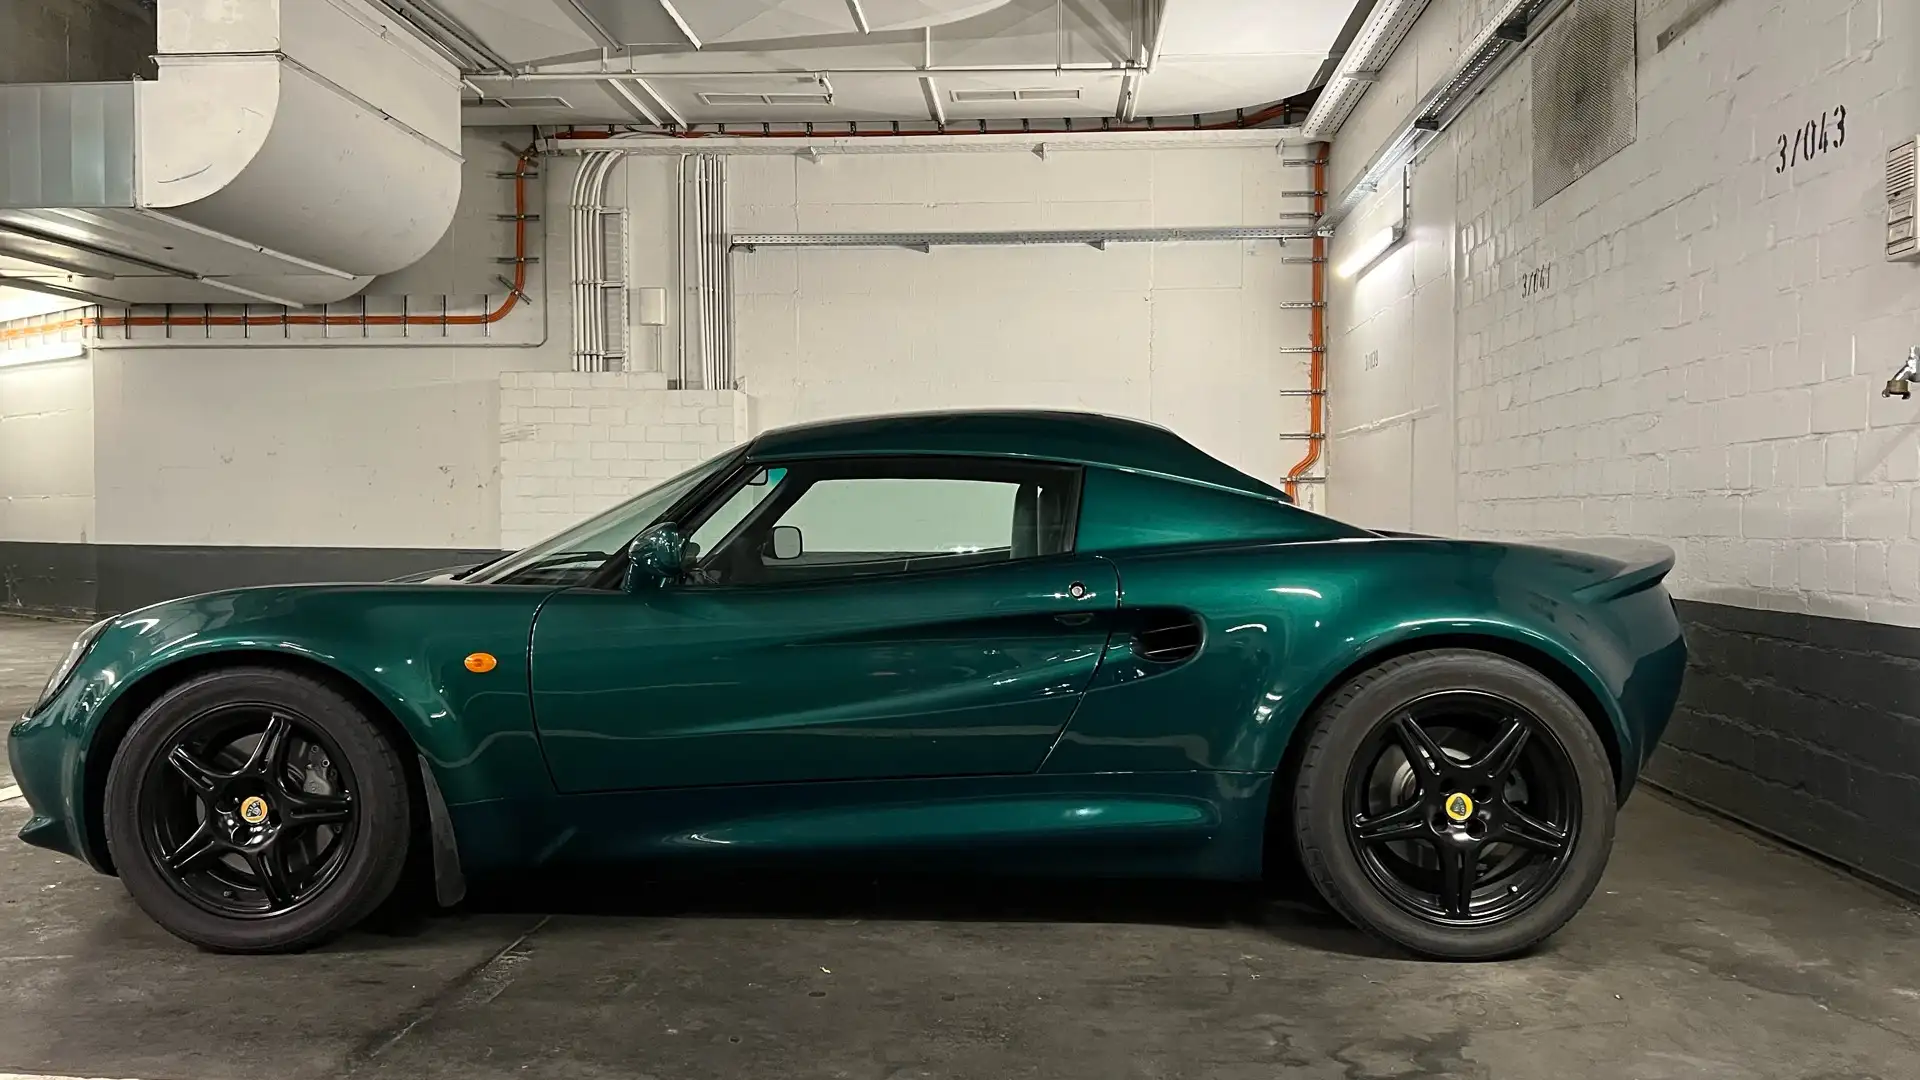 Lotus Elise LHD, Rotec, sehr guter Zustand Green - 2